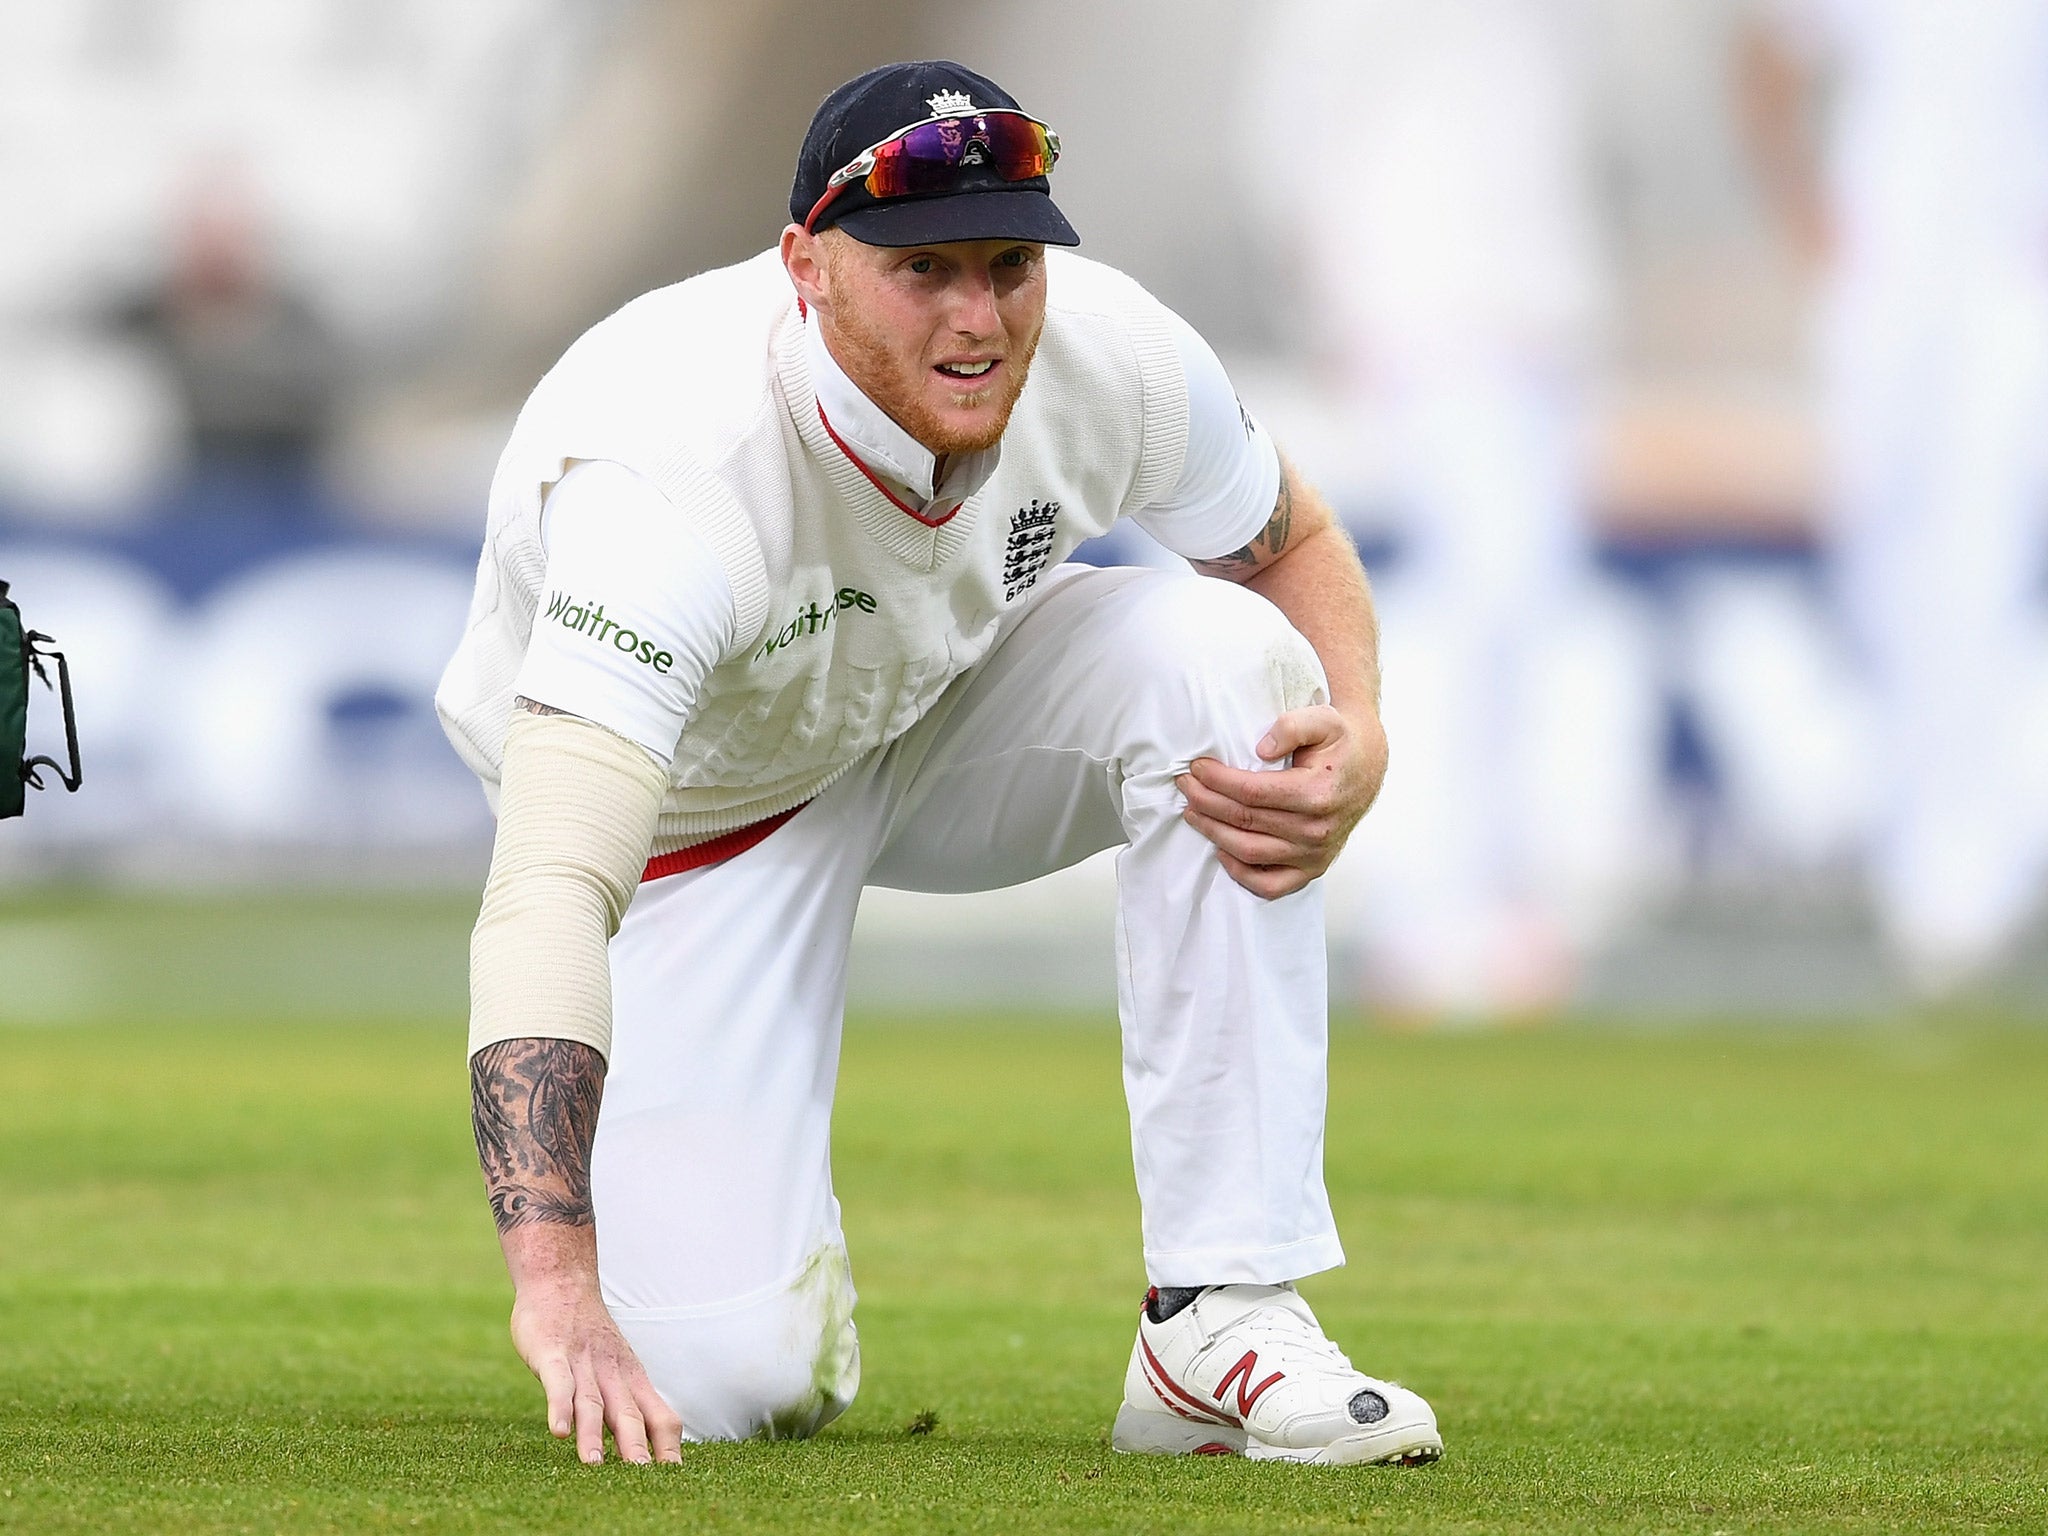 Ben Stokes suffered a knee injury that forced him off the field on Saturday morning